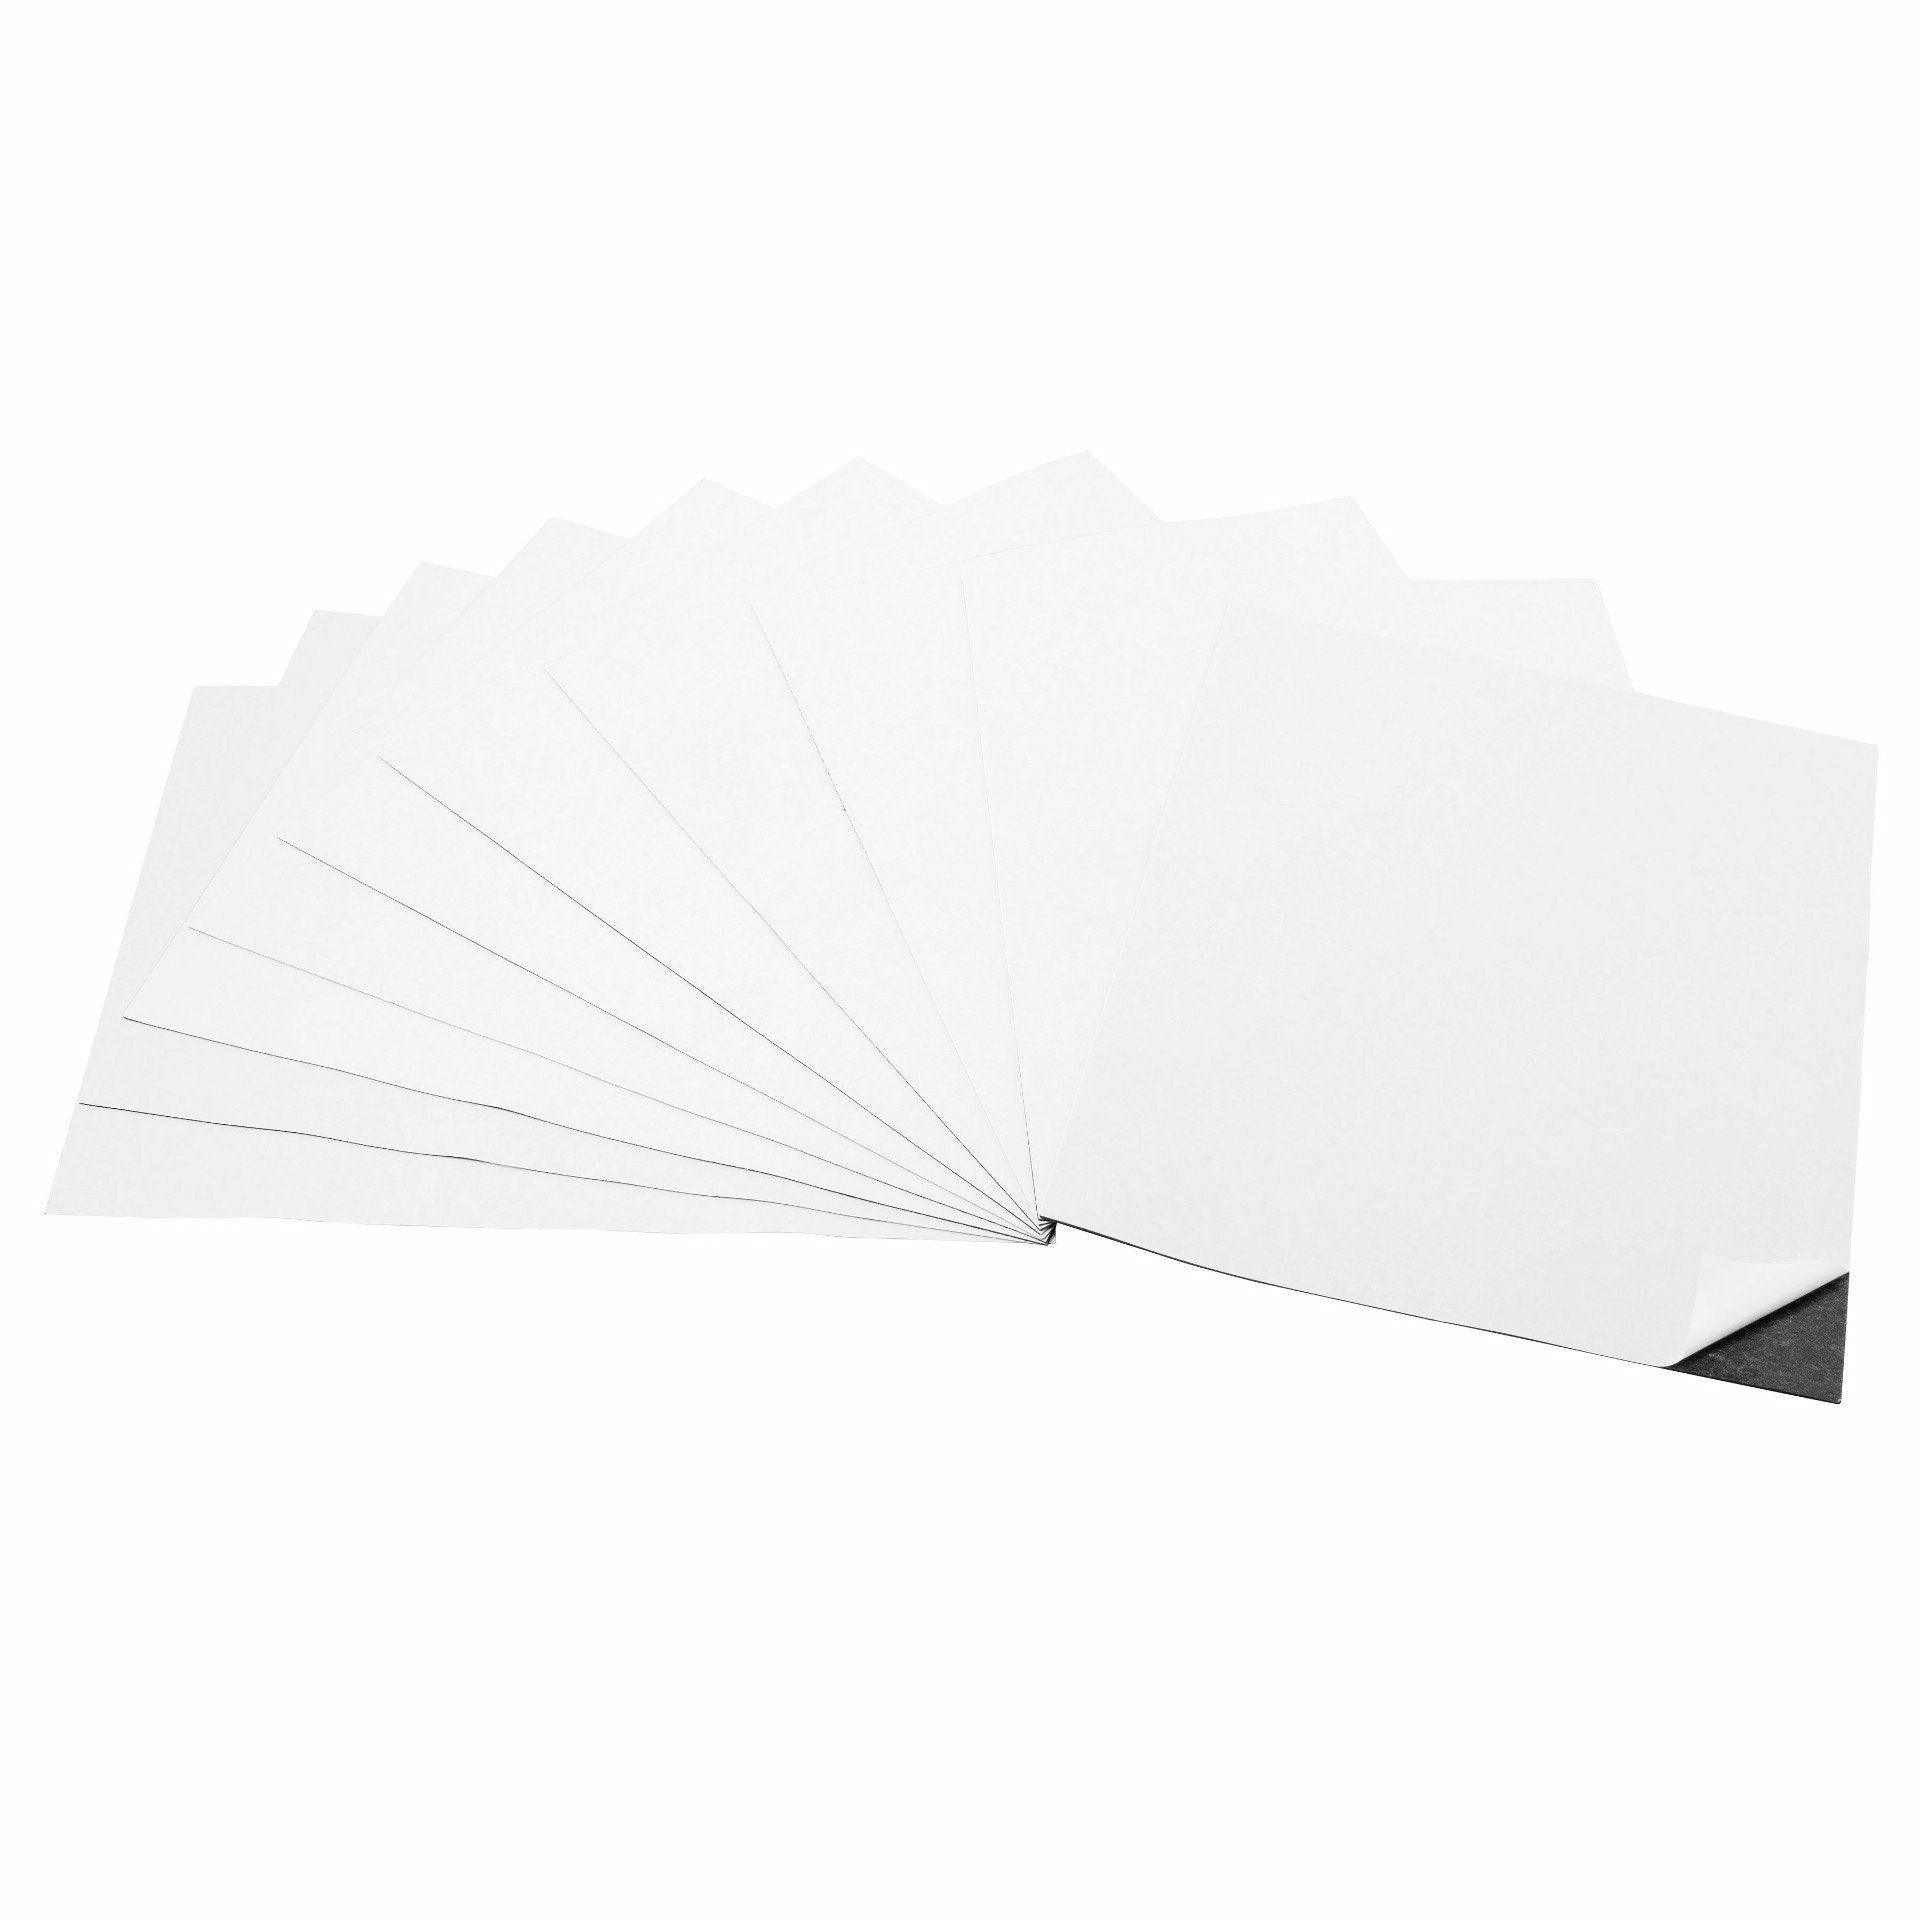 8 Inch Strong Self-Adhesive Magnetic Sheets Peel & Stick totalElement